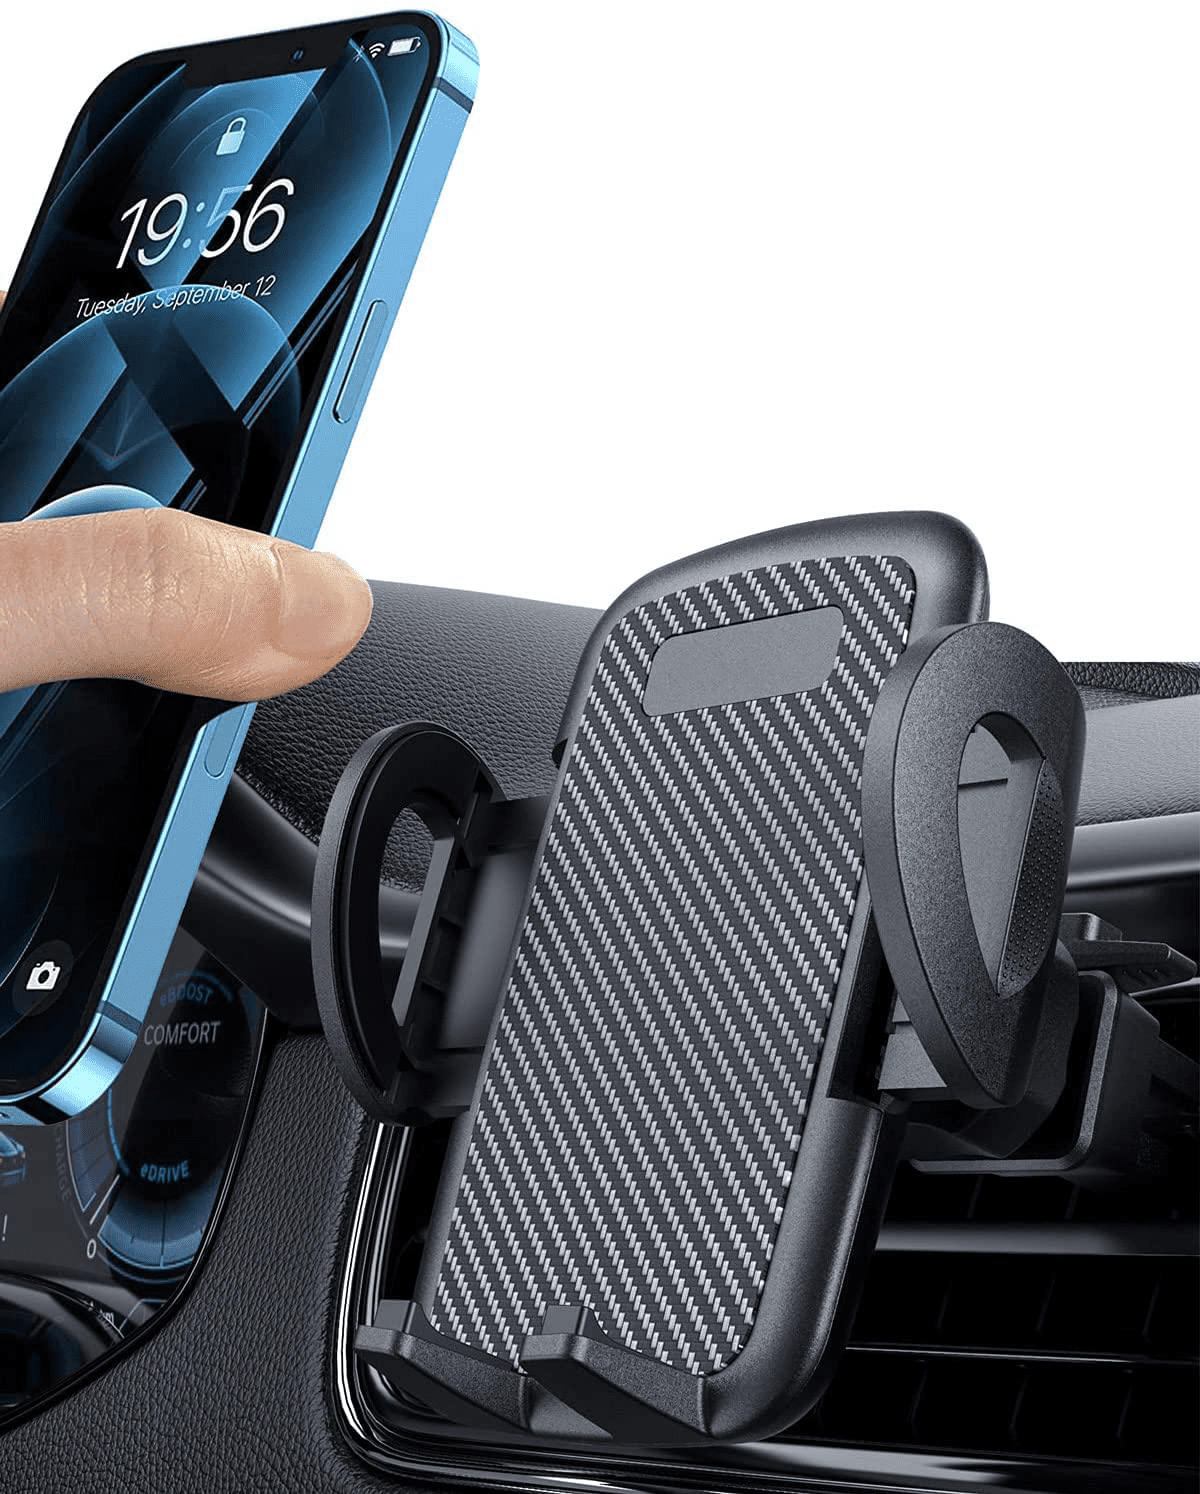 Areker Car Mobile Phone Car Holder Universal Air Vent Car Holder 360 Degree Rotation 2-level Adjustable Car Cradle Mount iPhone X 8 7 7 Plus 6s SE Samsung S8 Plus S7 HTC Huawei and More - Quntis